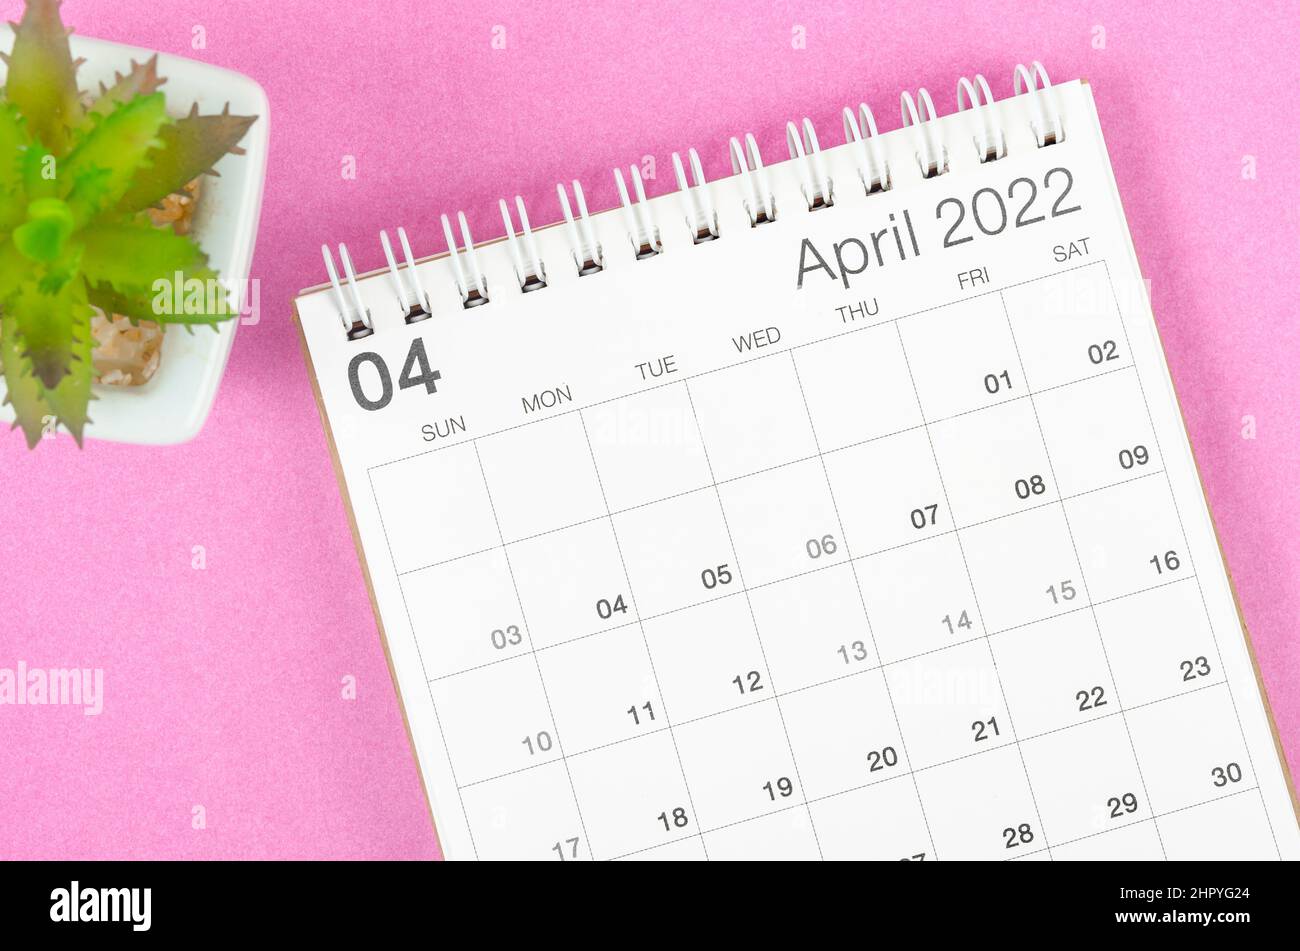 The April 2022 desk calendar with plant pot on pink background. Stock Photo